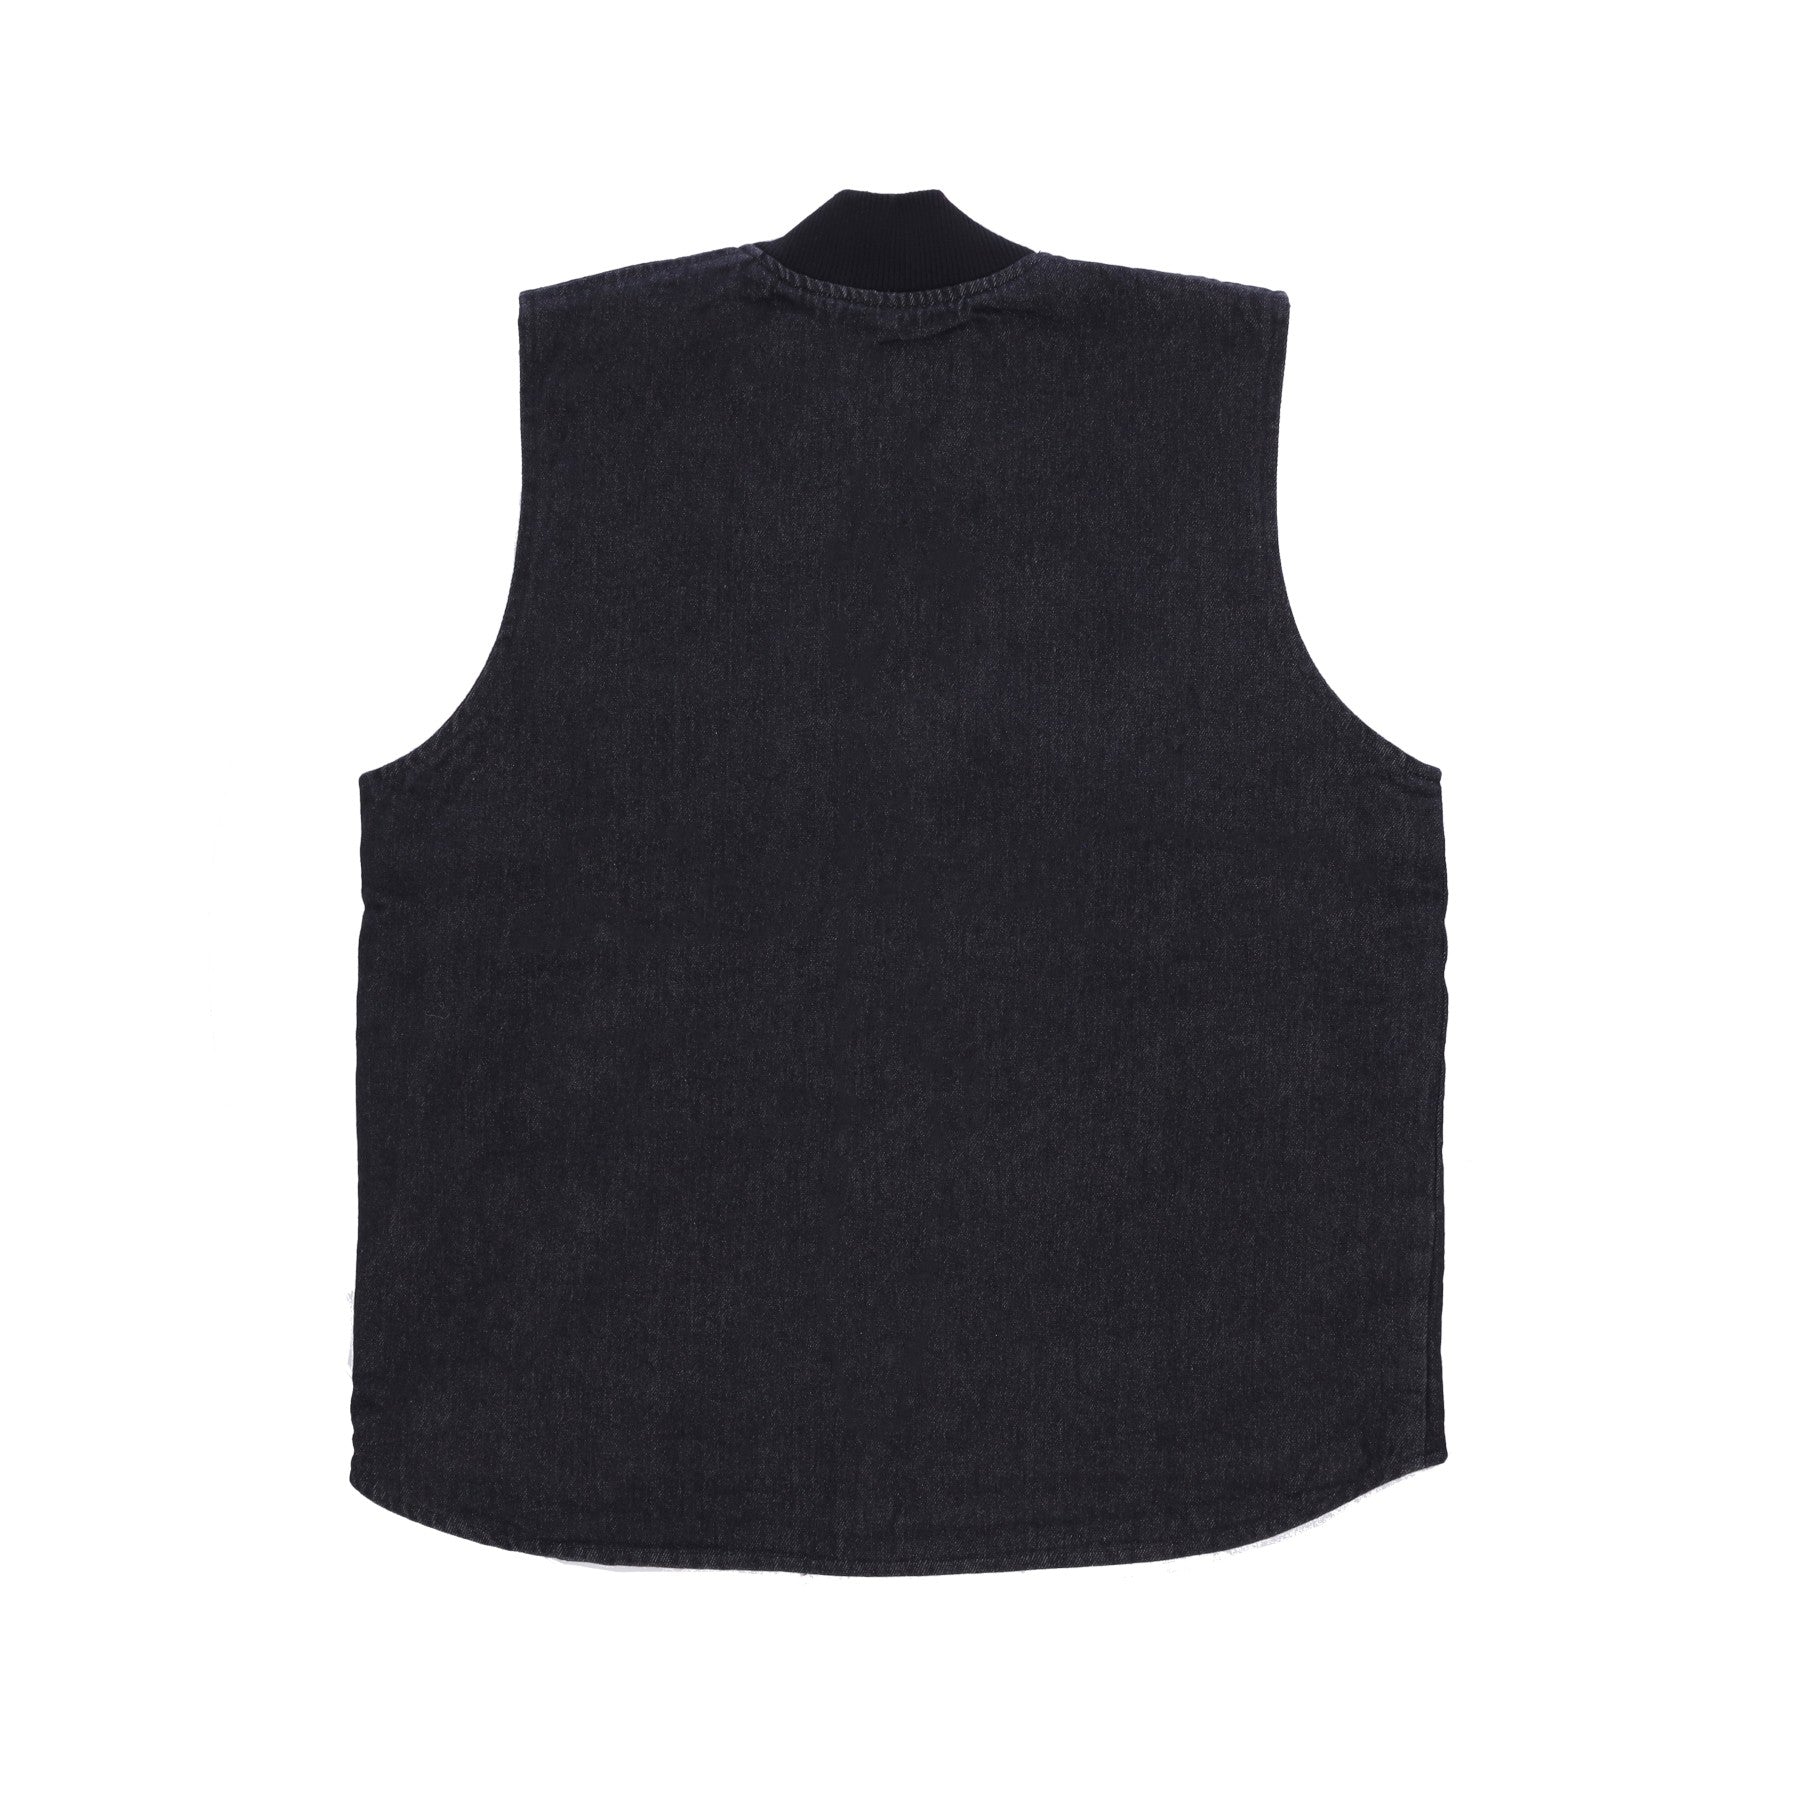 Independent, Smanicato Uomo Halsted Reversible Vest, 